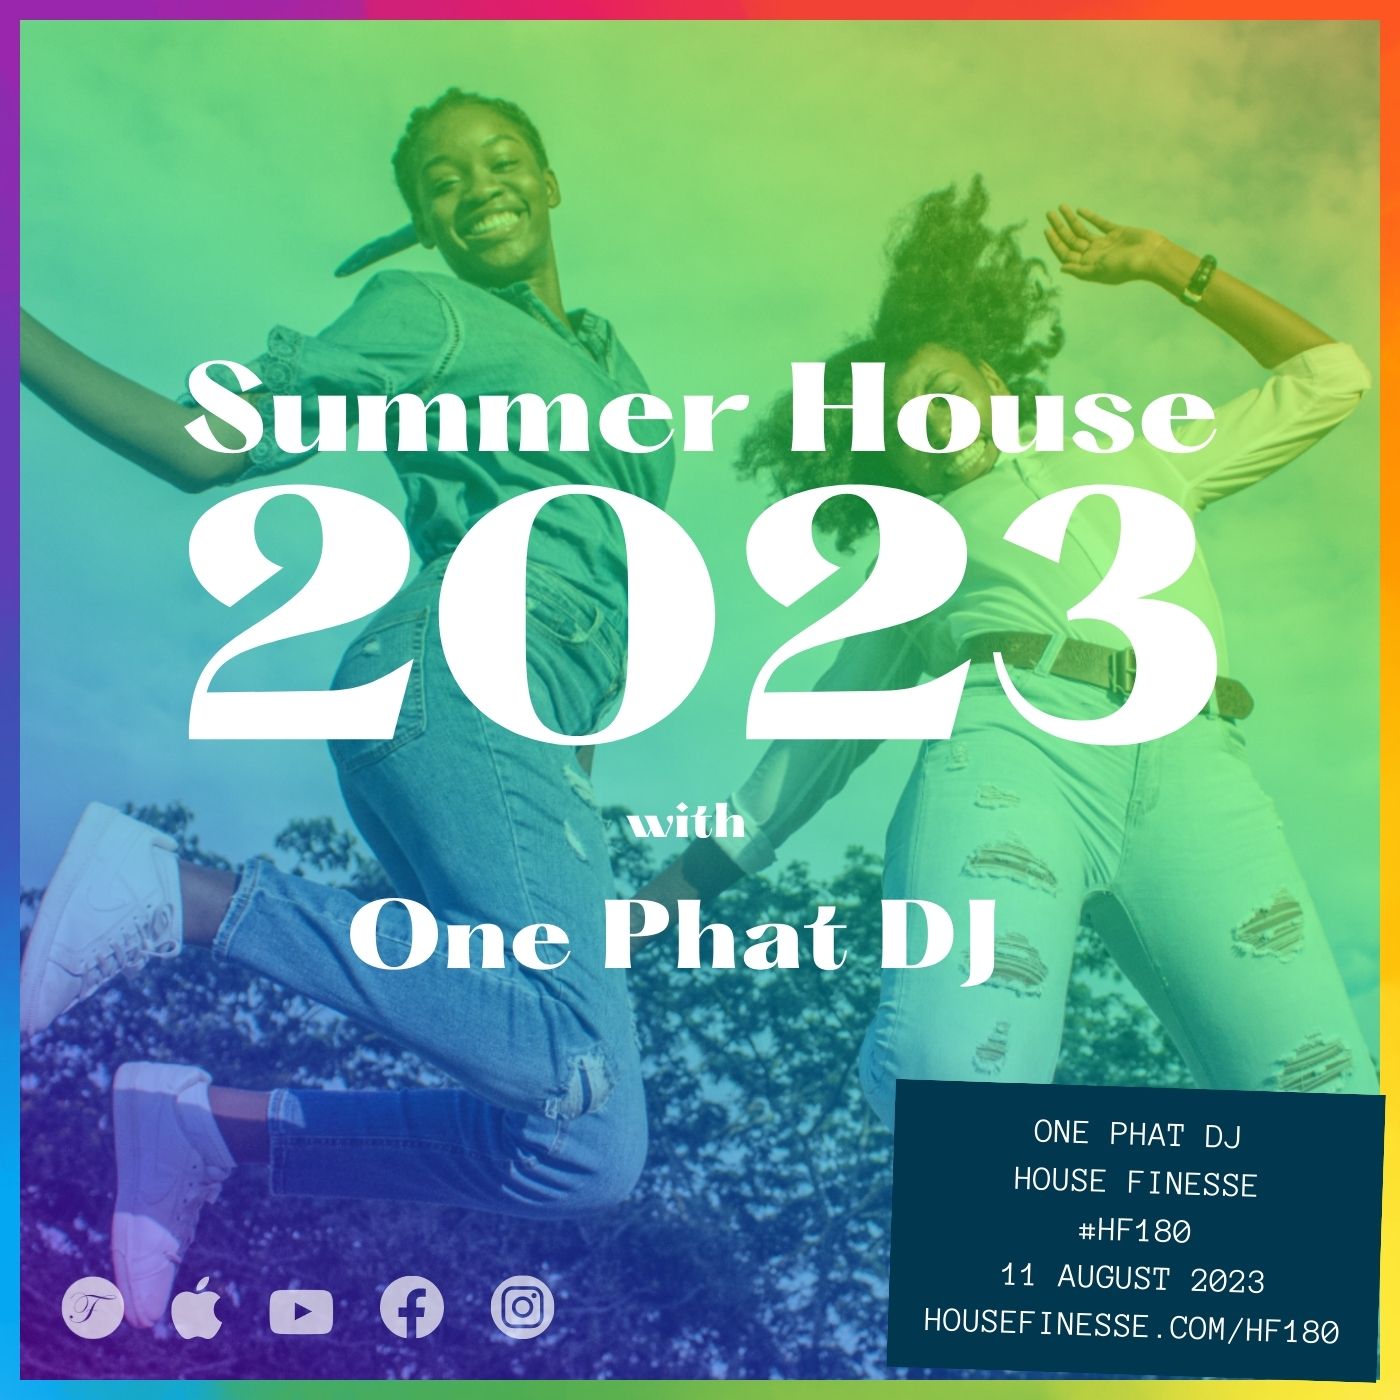 Summer House 2023 with One Phat DJ